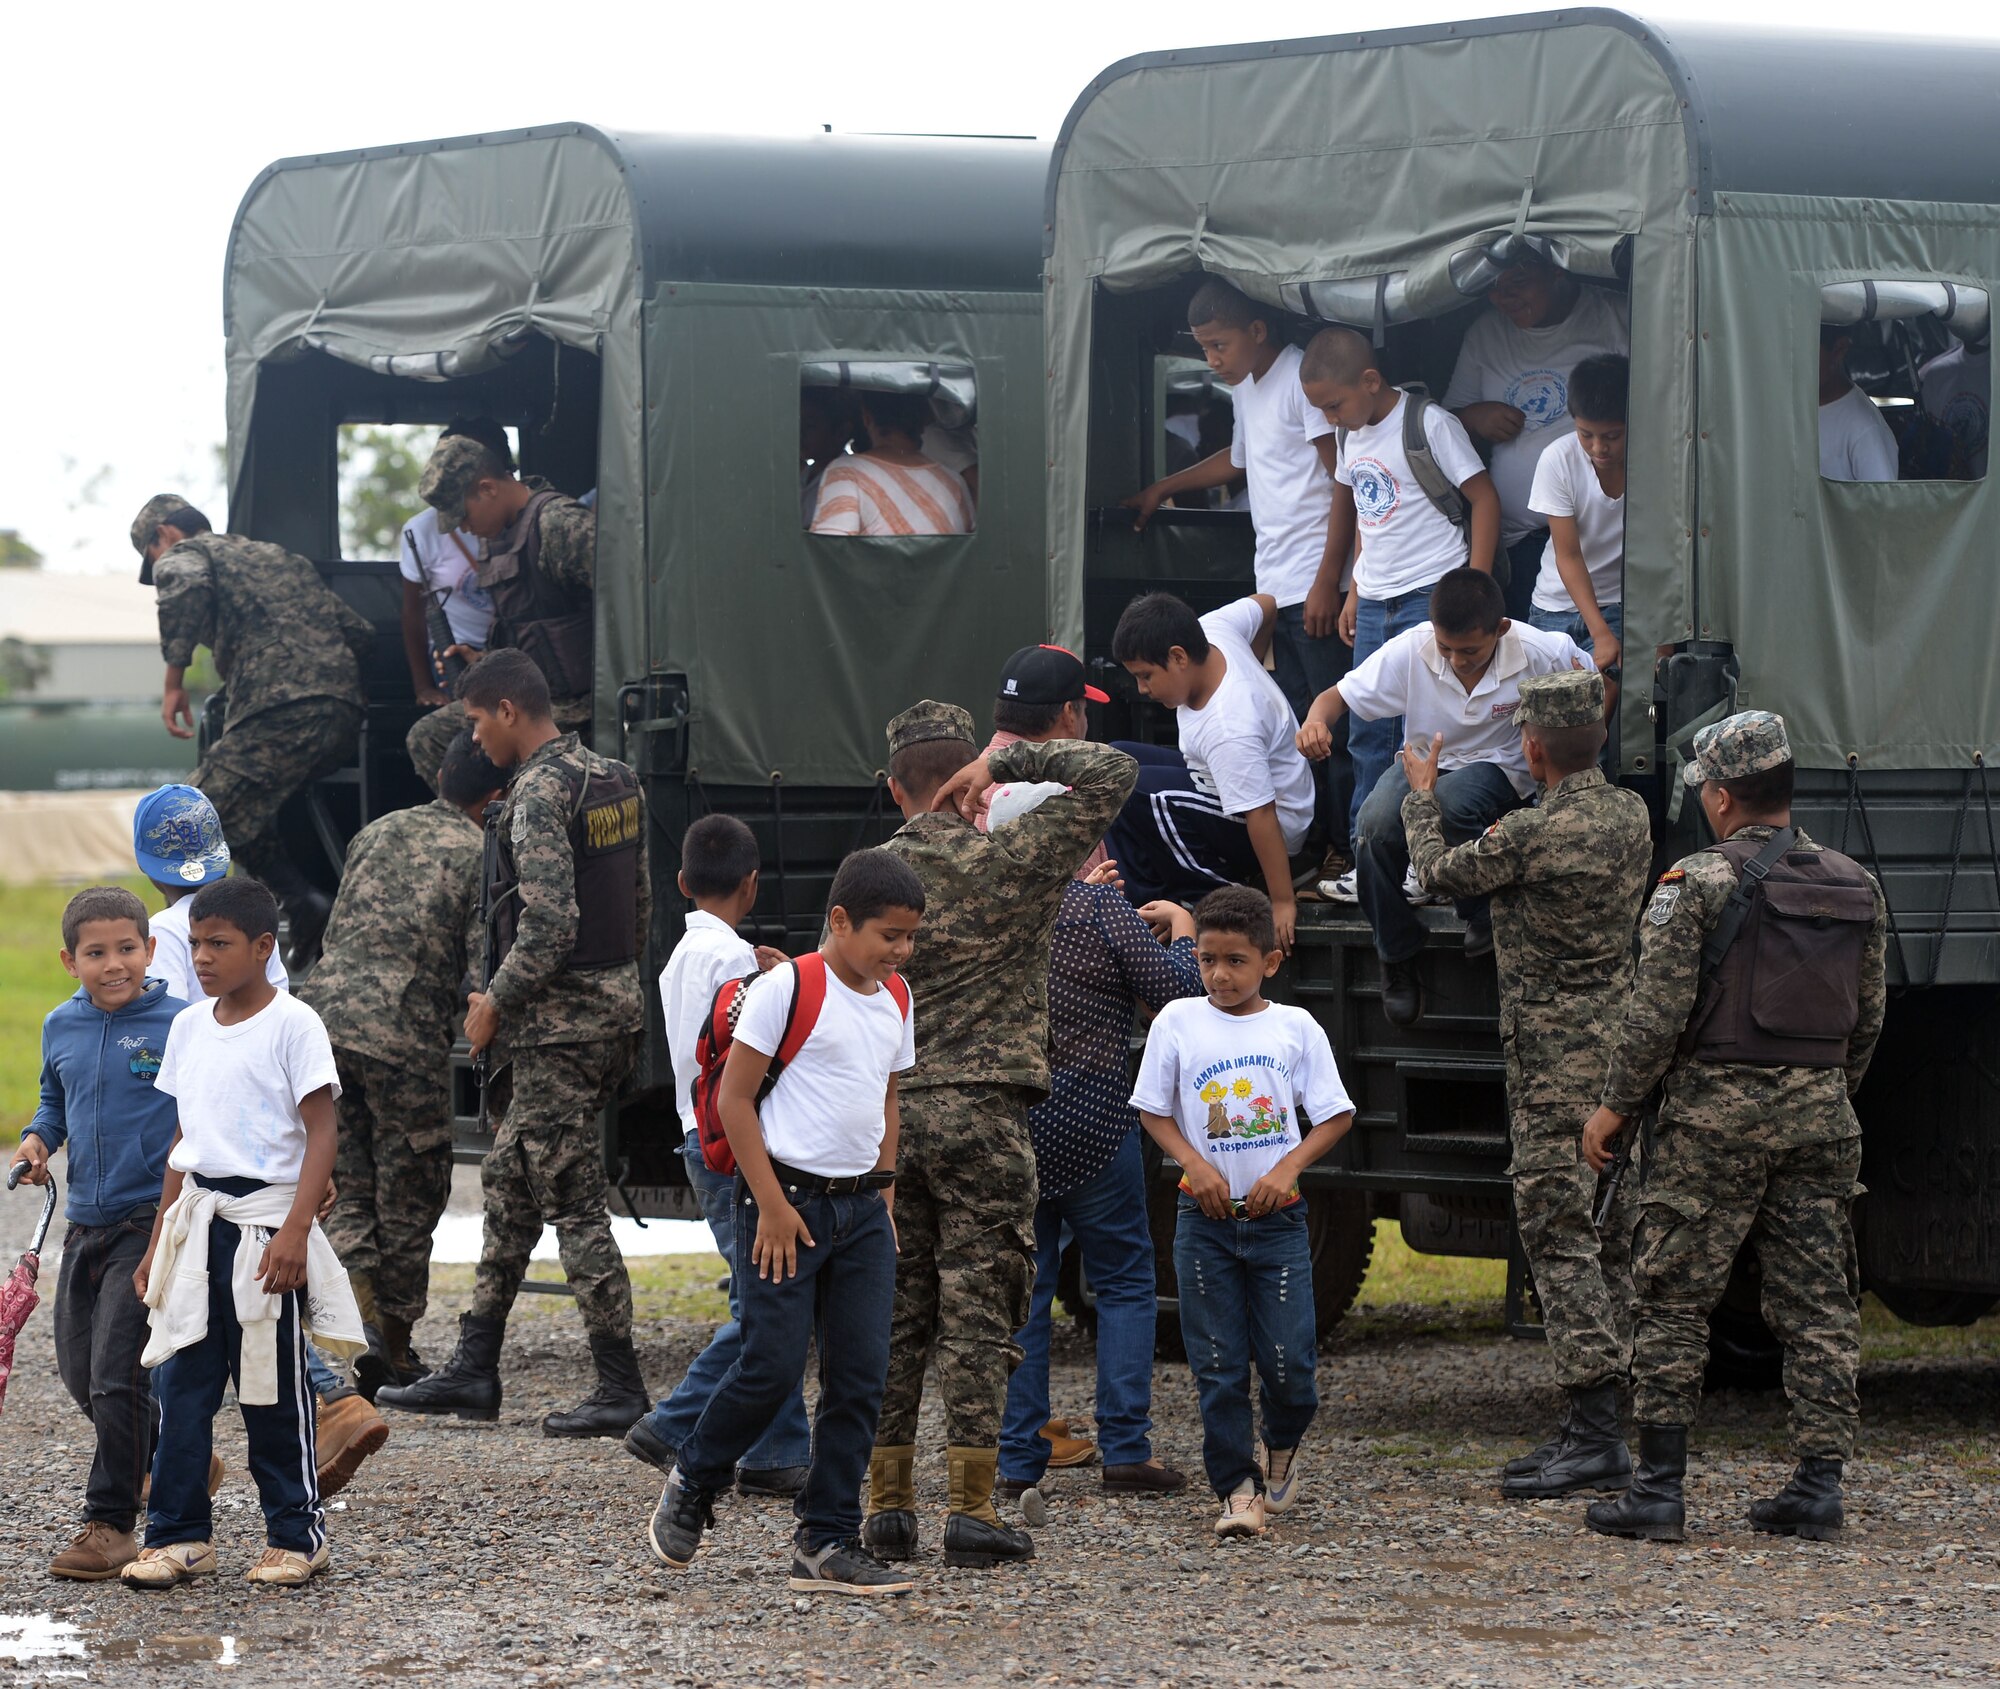 Children from the surrounding communities arrive at Puerto Castillo Naval Base in Trujillo, Honduras, June 6, 2015, to participate in the Guardians of the Fatherland event. Guardians goes twice and year and includes about 200 children per session. Each session lasts about 6 months, every Saturday and includes classes on civic values, military values, spiritual values and human rights. NEW HORIZONS Honduras 2015 personnel also participated in the event which they plan to participate in every Saturday throughout the duration of their time in Honduras. NEW HORIZONS was launched in the 1980s and is an annual joint humanitarian assistance exercise that U.S. Southern Command conducts with a partner nation in Central America, South America or the Caribbean. The exercise improves joint training readiness of U.S. and partner nation civil engineers, medical professionals and support personnel through humanitarian assistance activities. (U.S. Air Force photo by Capt. David J. Murphy/Released)